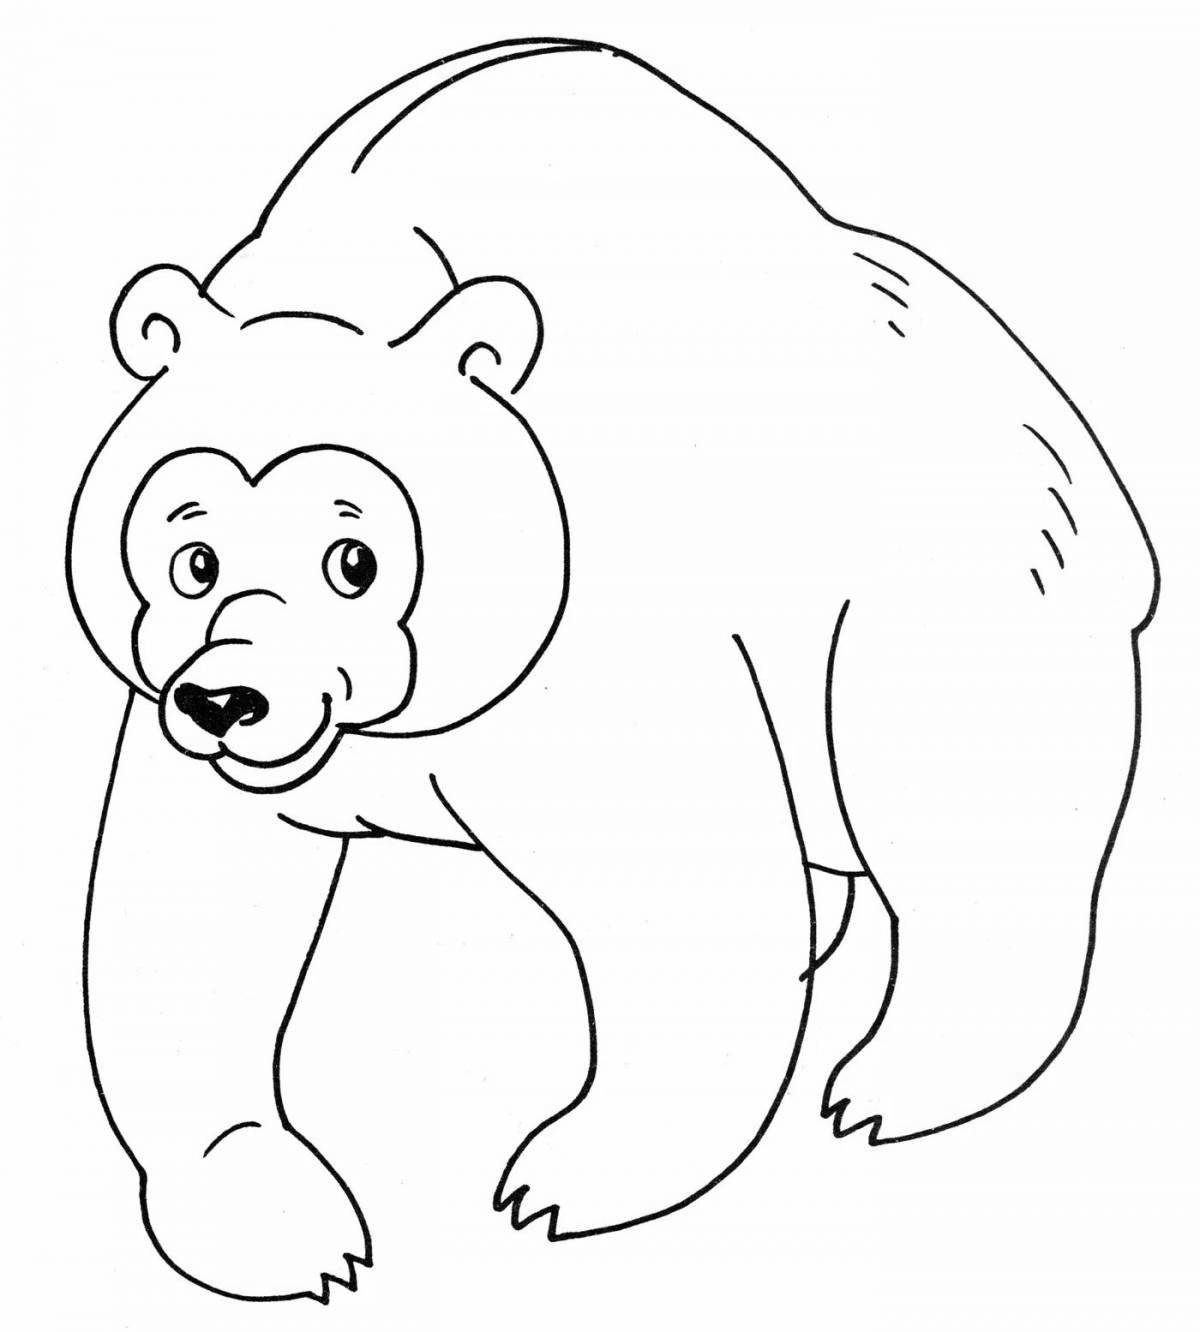 Bright coloring clumsy bear